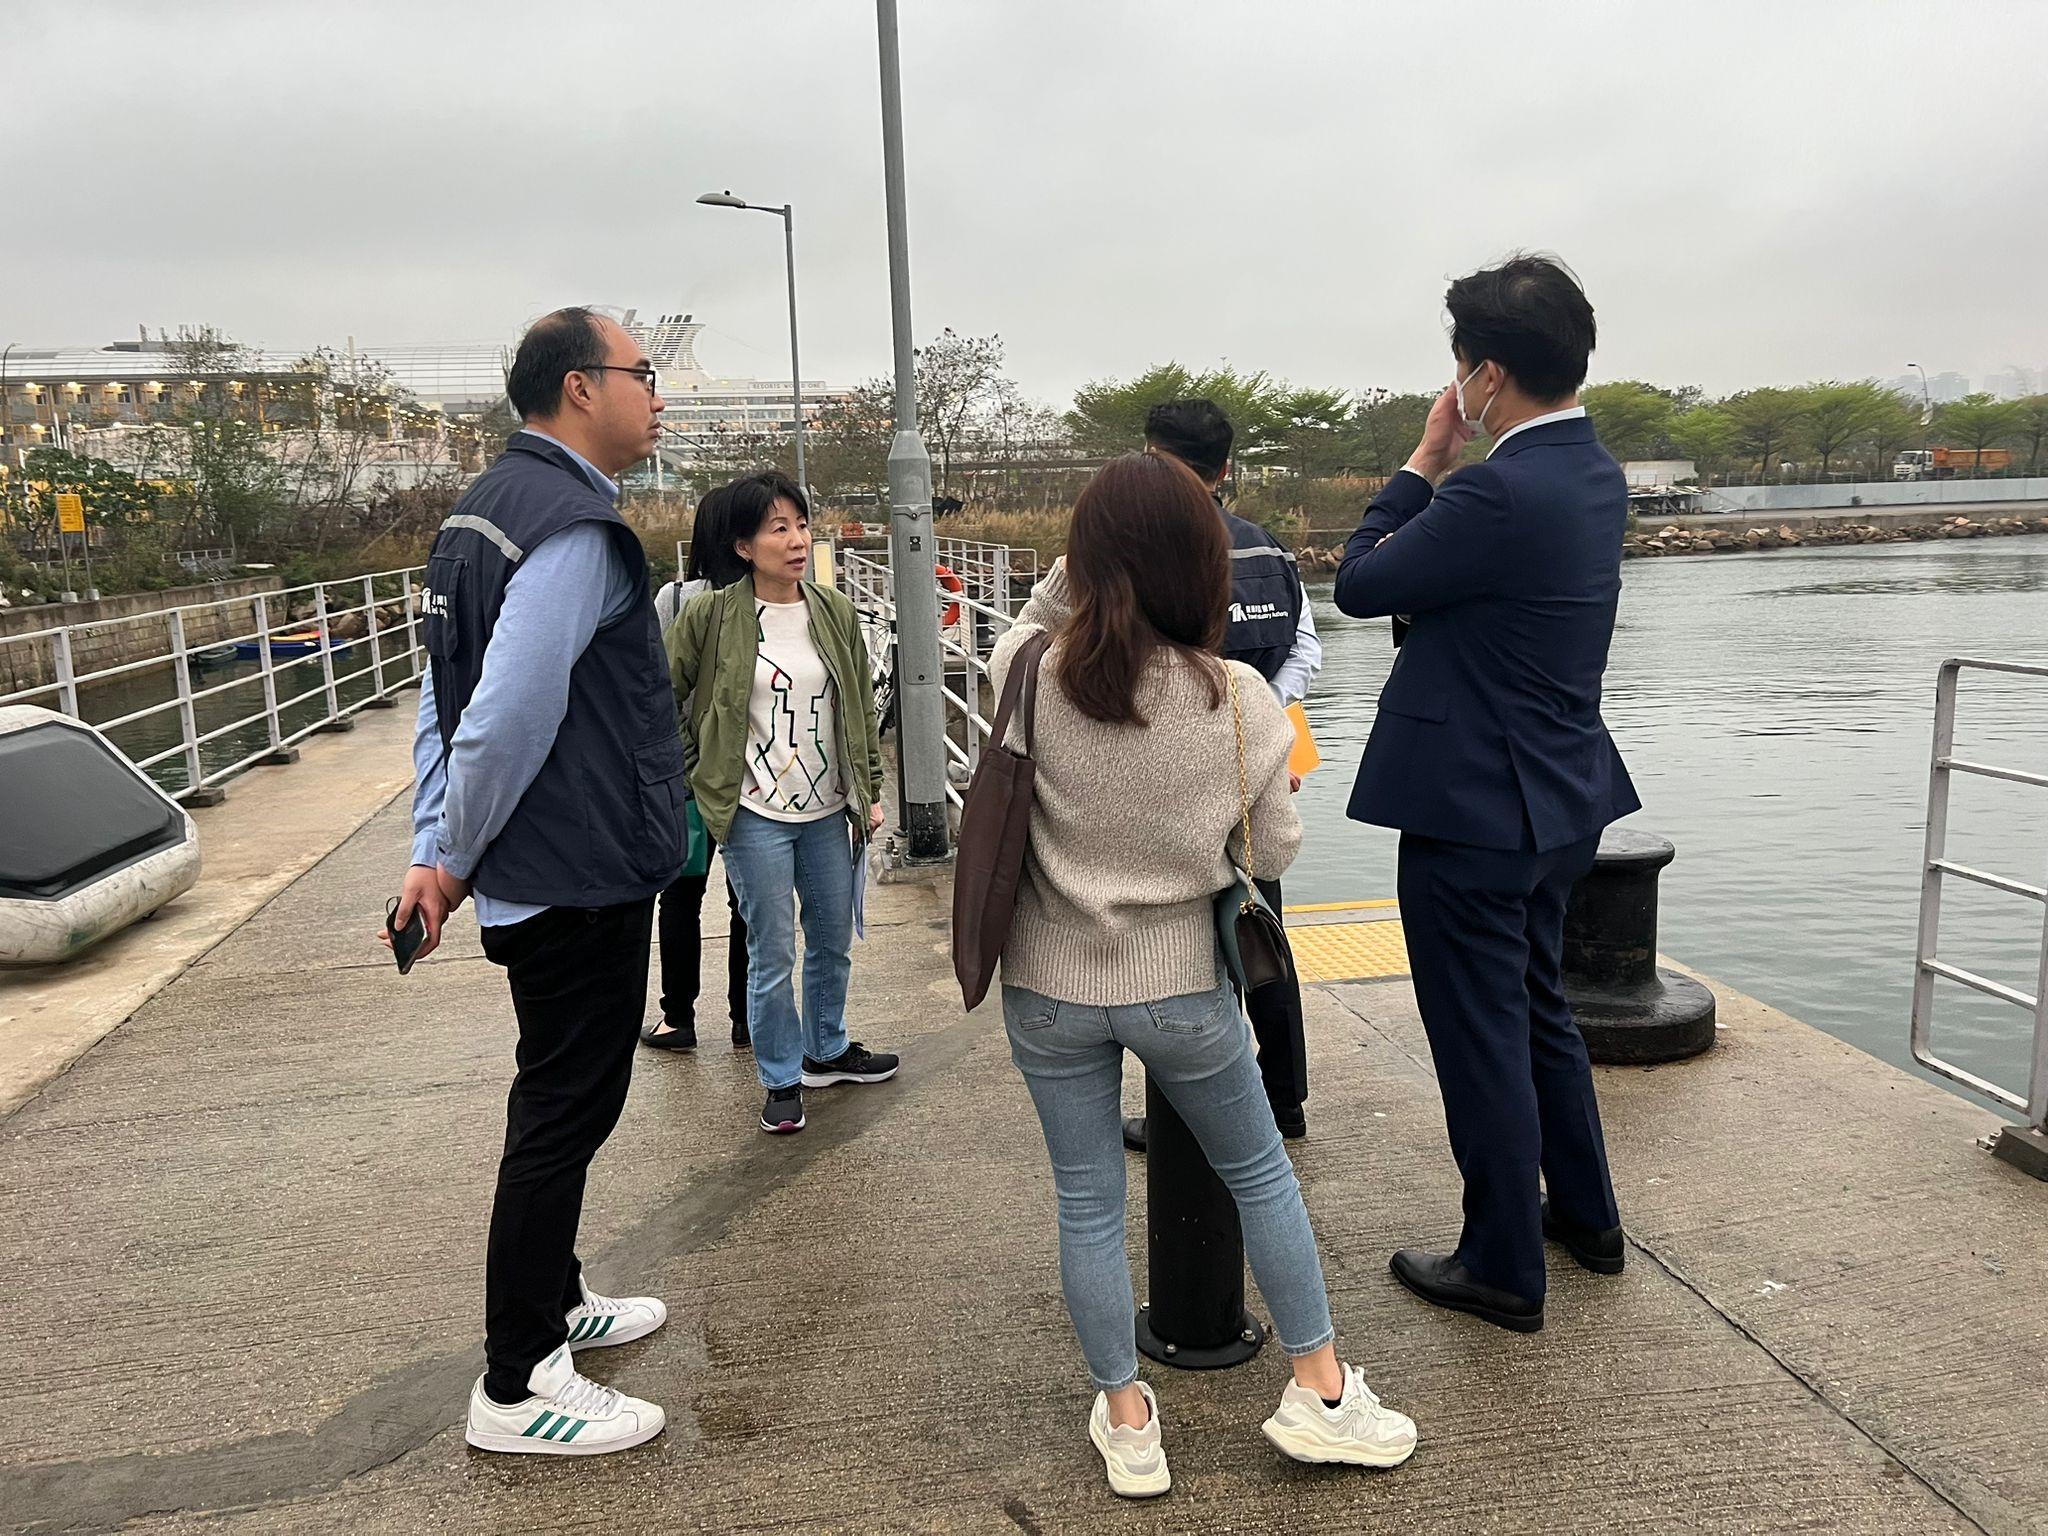 The Commissioner for Tourism, Ms Vivian Sum (second left), inspected the Kai Tak Runway Park Pier on March 31, and discussed with the Travel Industry Authority on the arrangements for facilitating the trade to better utilise the concerned supporting facilities to disperse visitors participating in Victoria Harbour cruises.